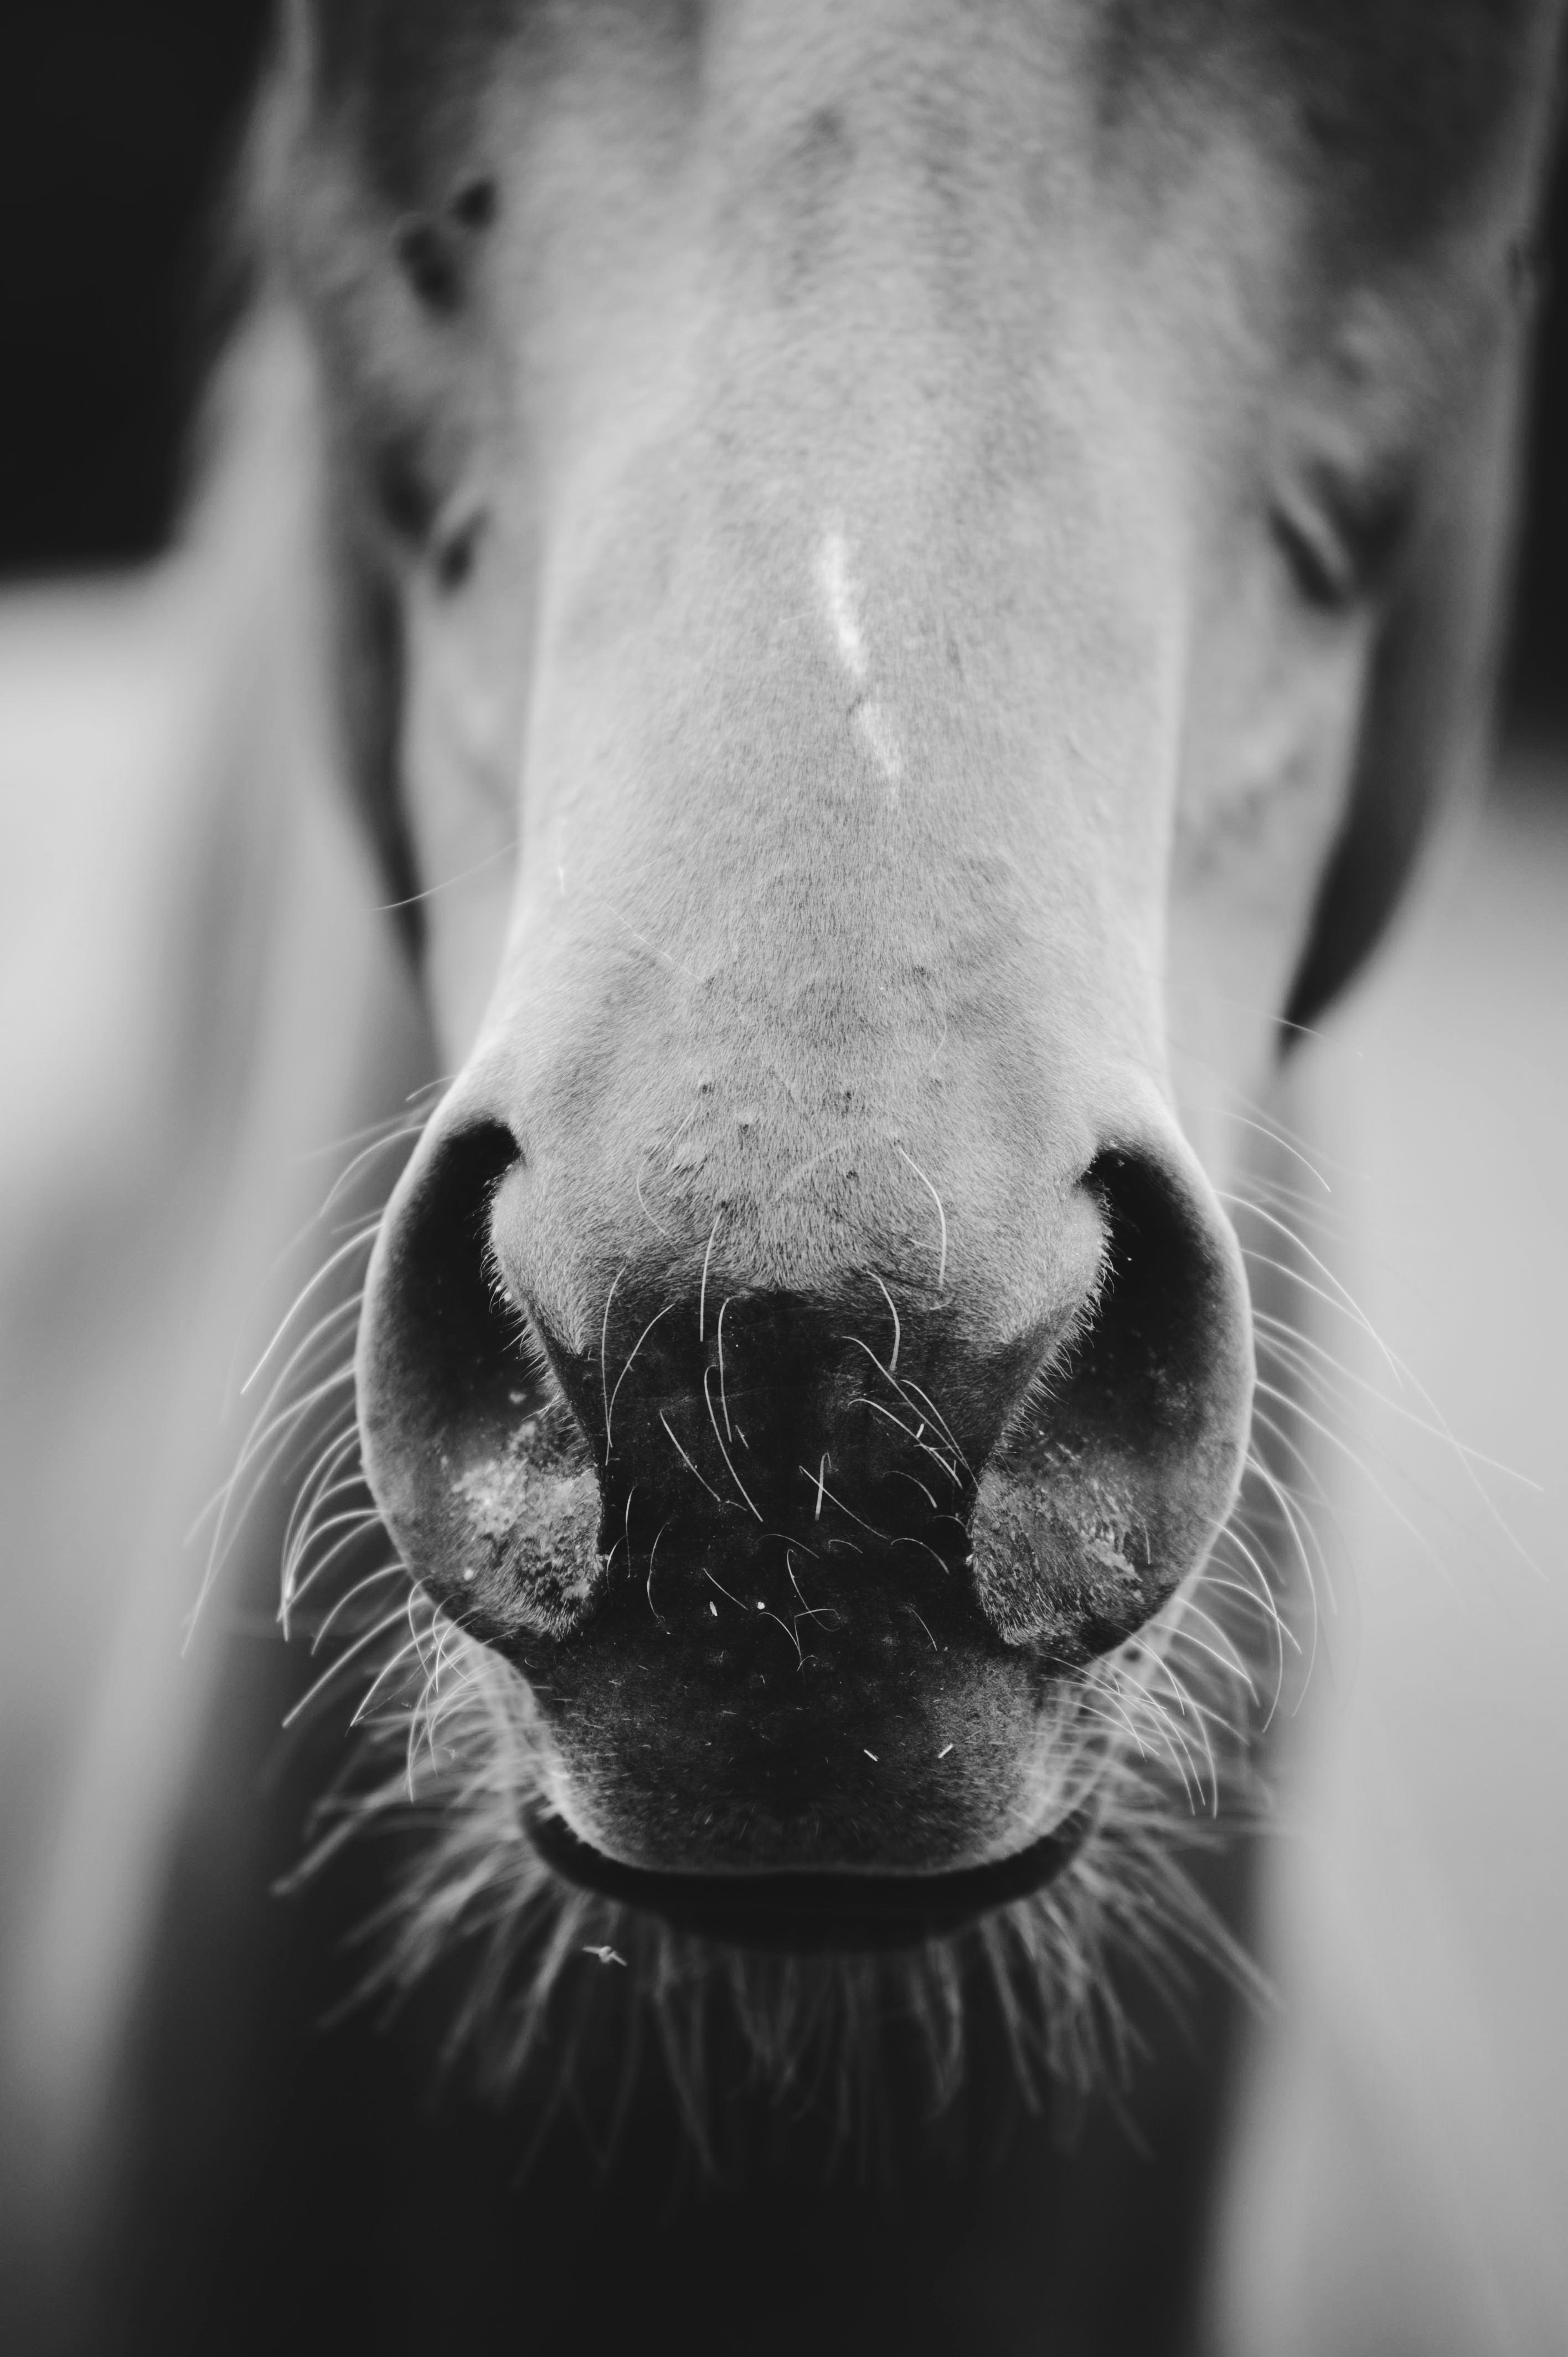 Horse nuzzle in black and white